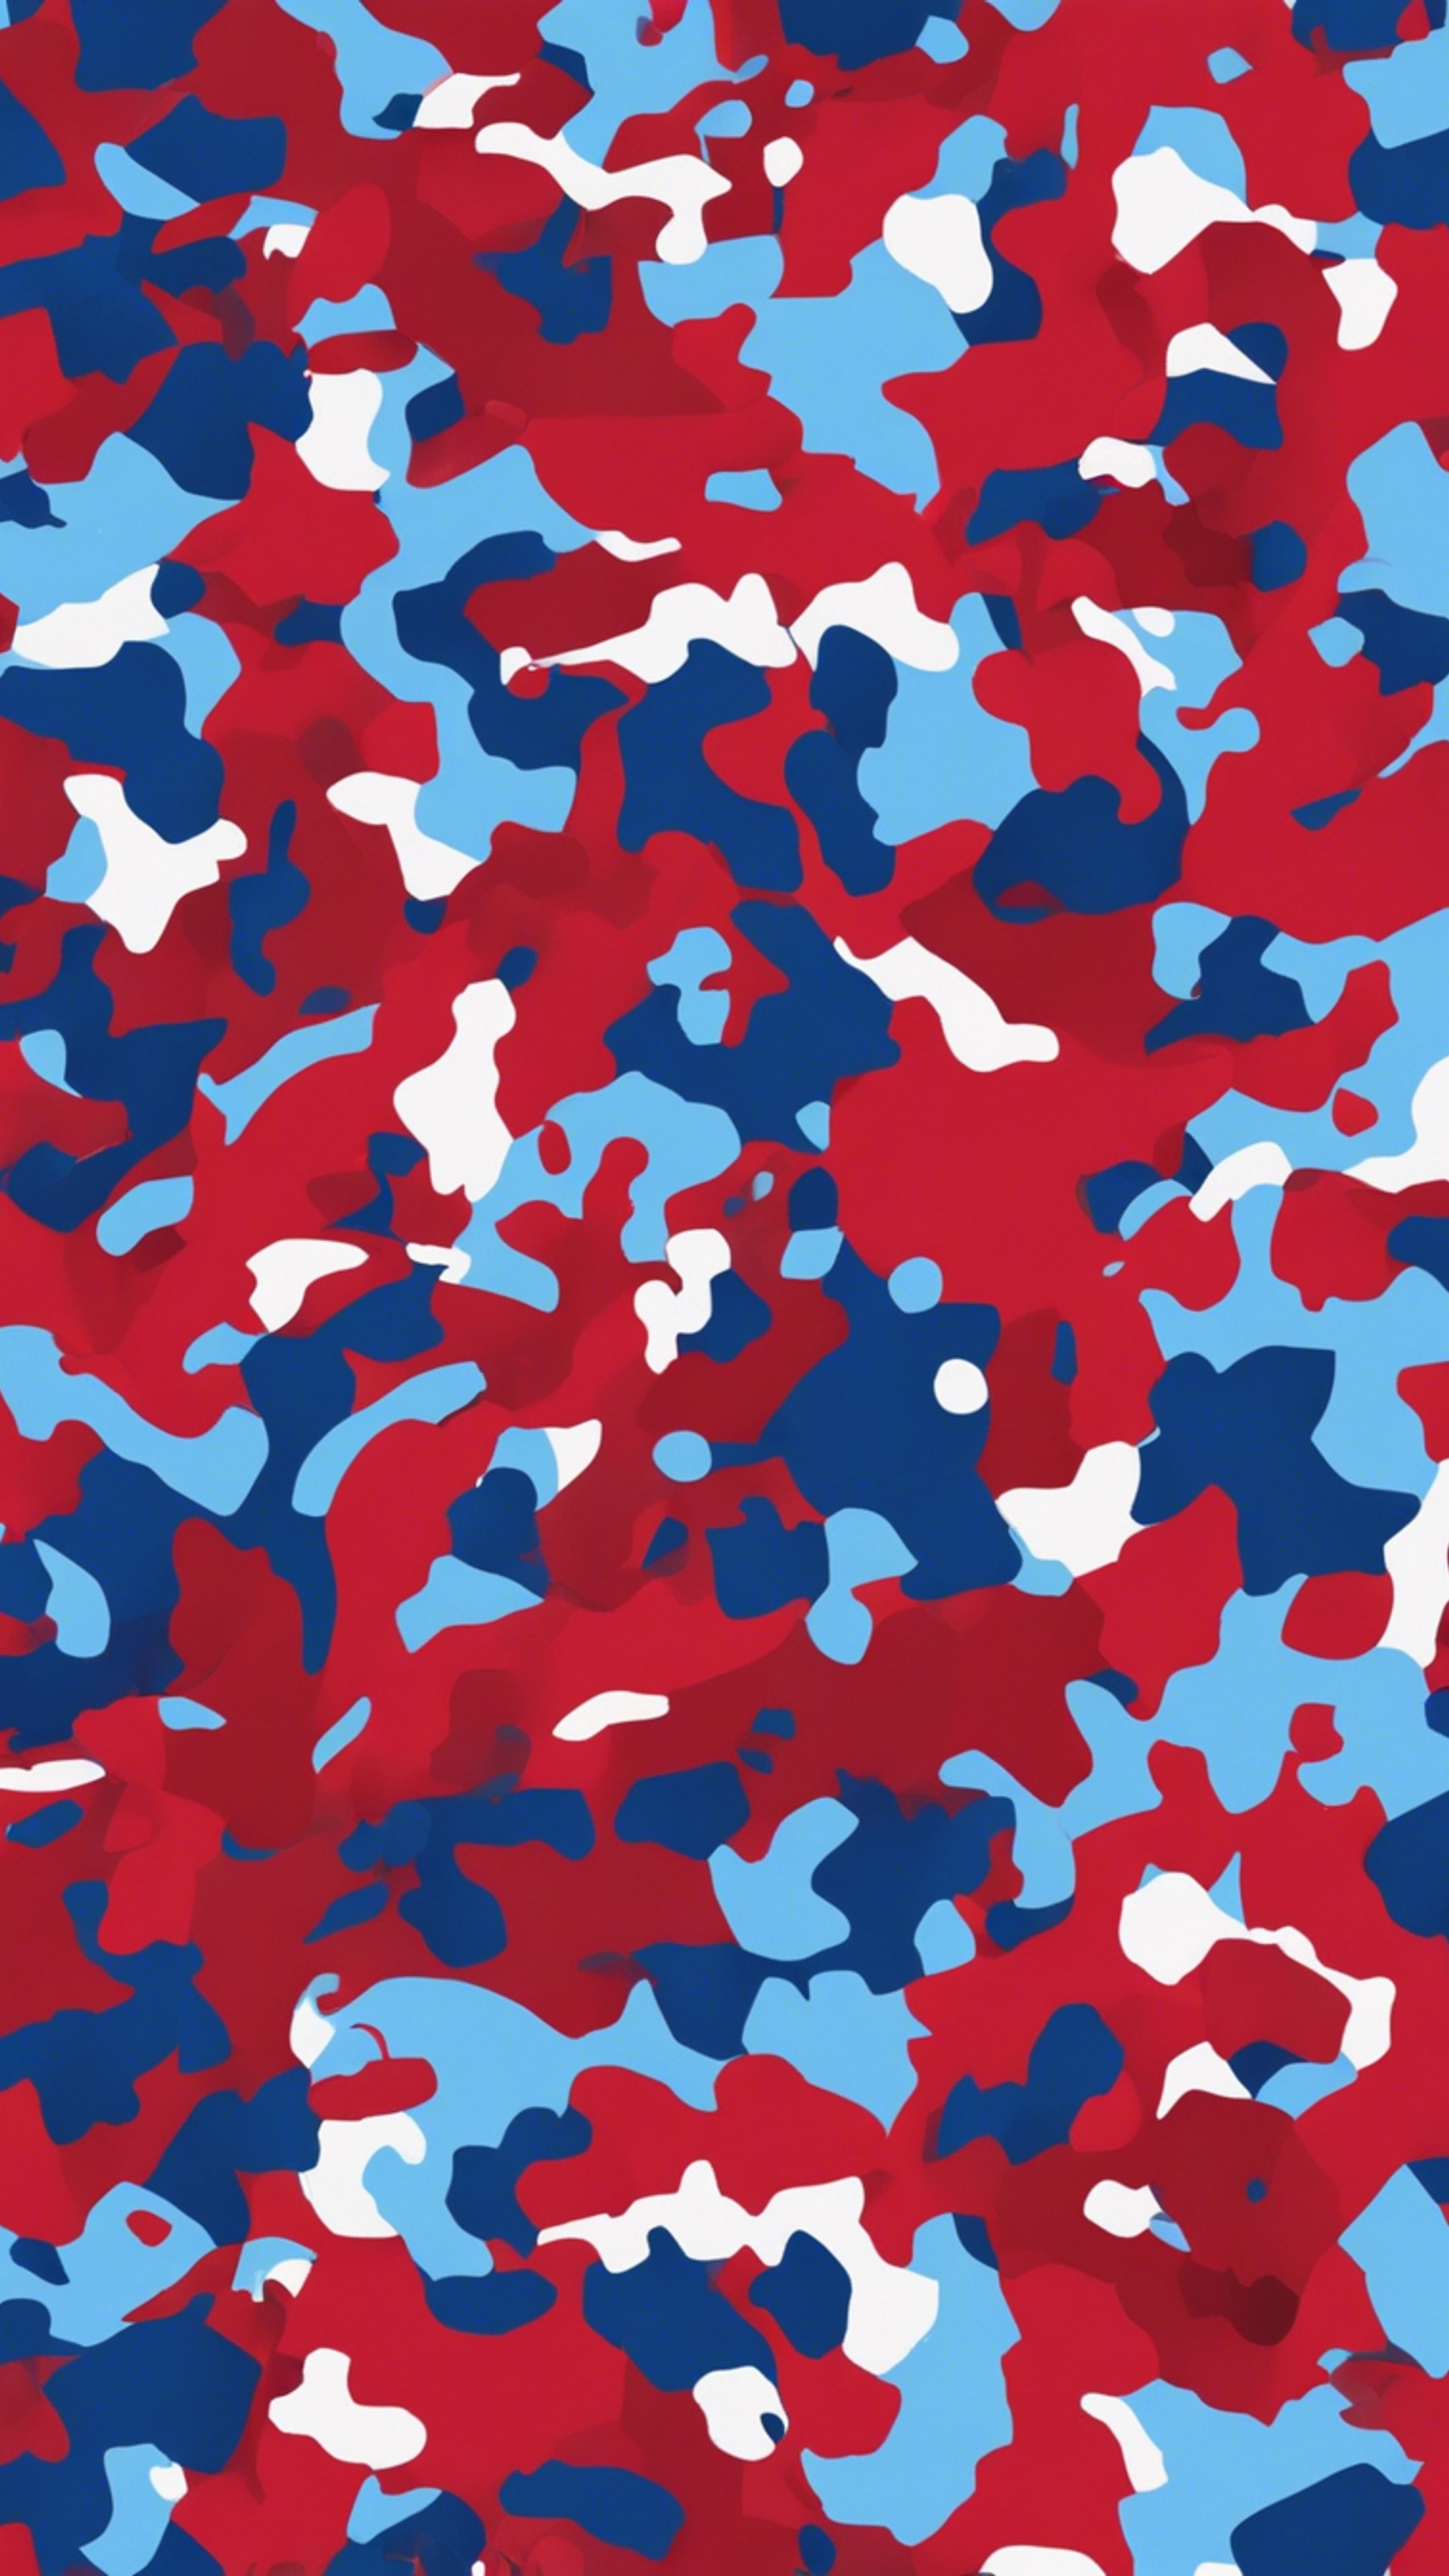 Camouflage pattern in shades of red and blue distributed randomly. Behang[29e12ceb4fee465f920c]